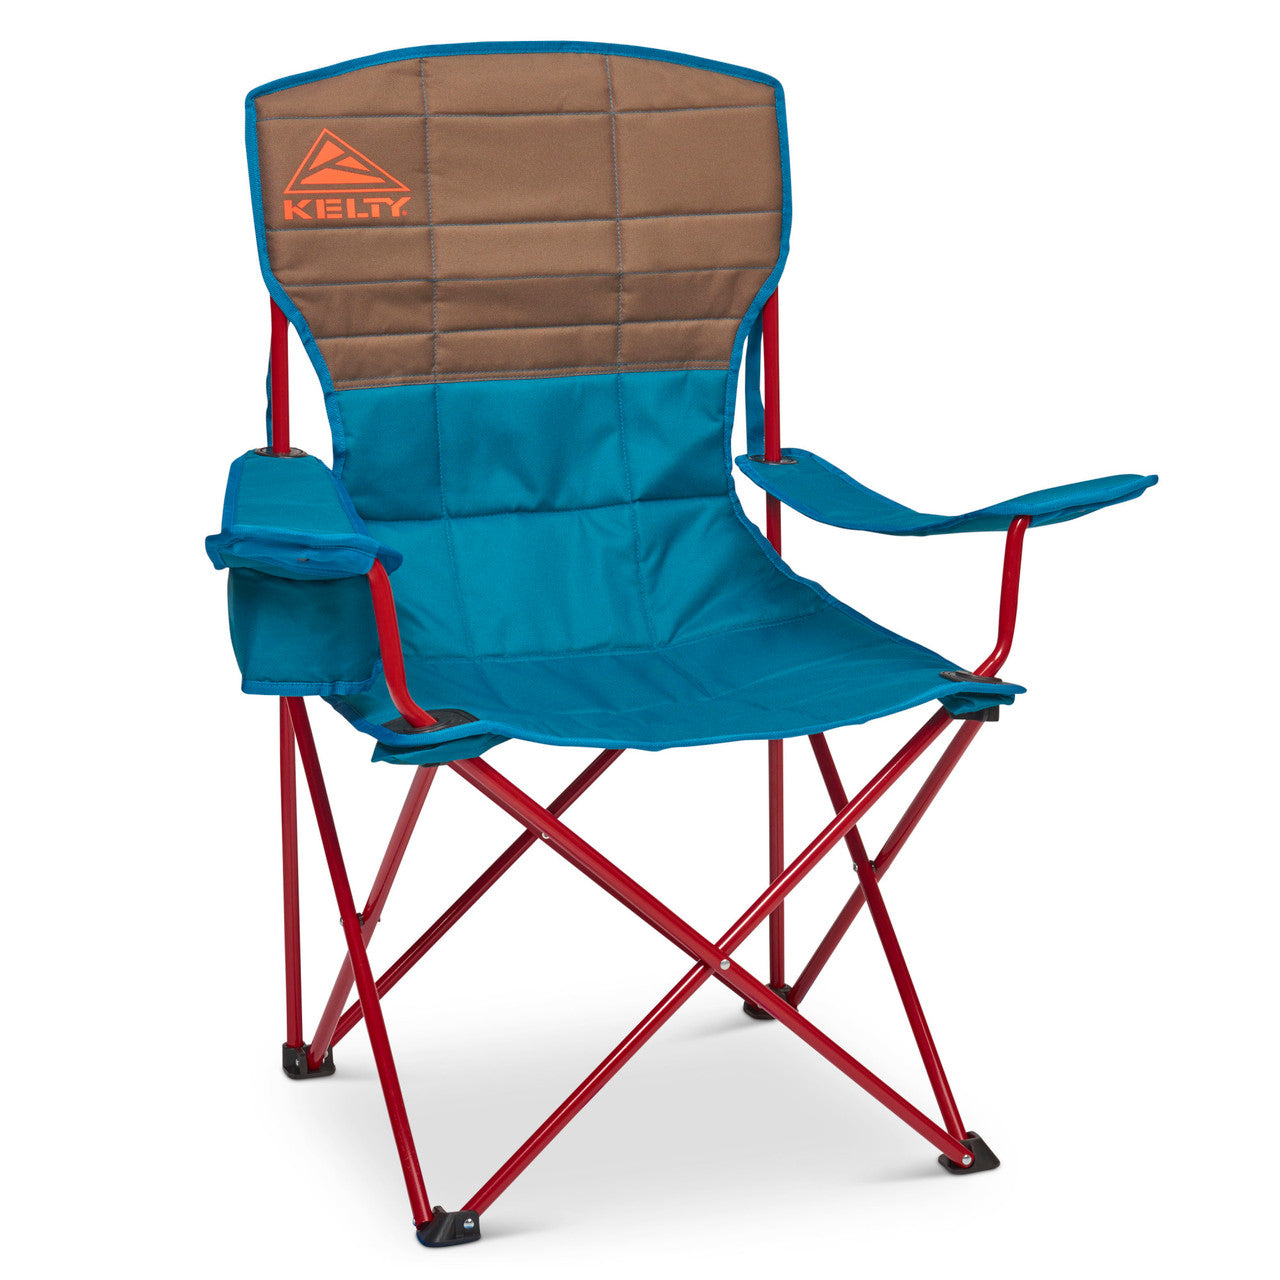 KELTY Essential Chair - (Canyon Brown & Deep Lake Colors Available)